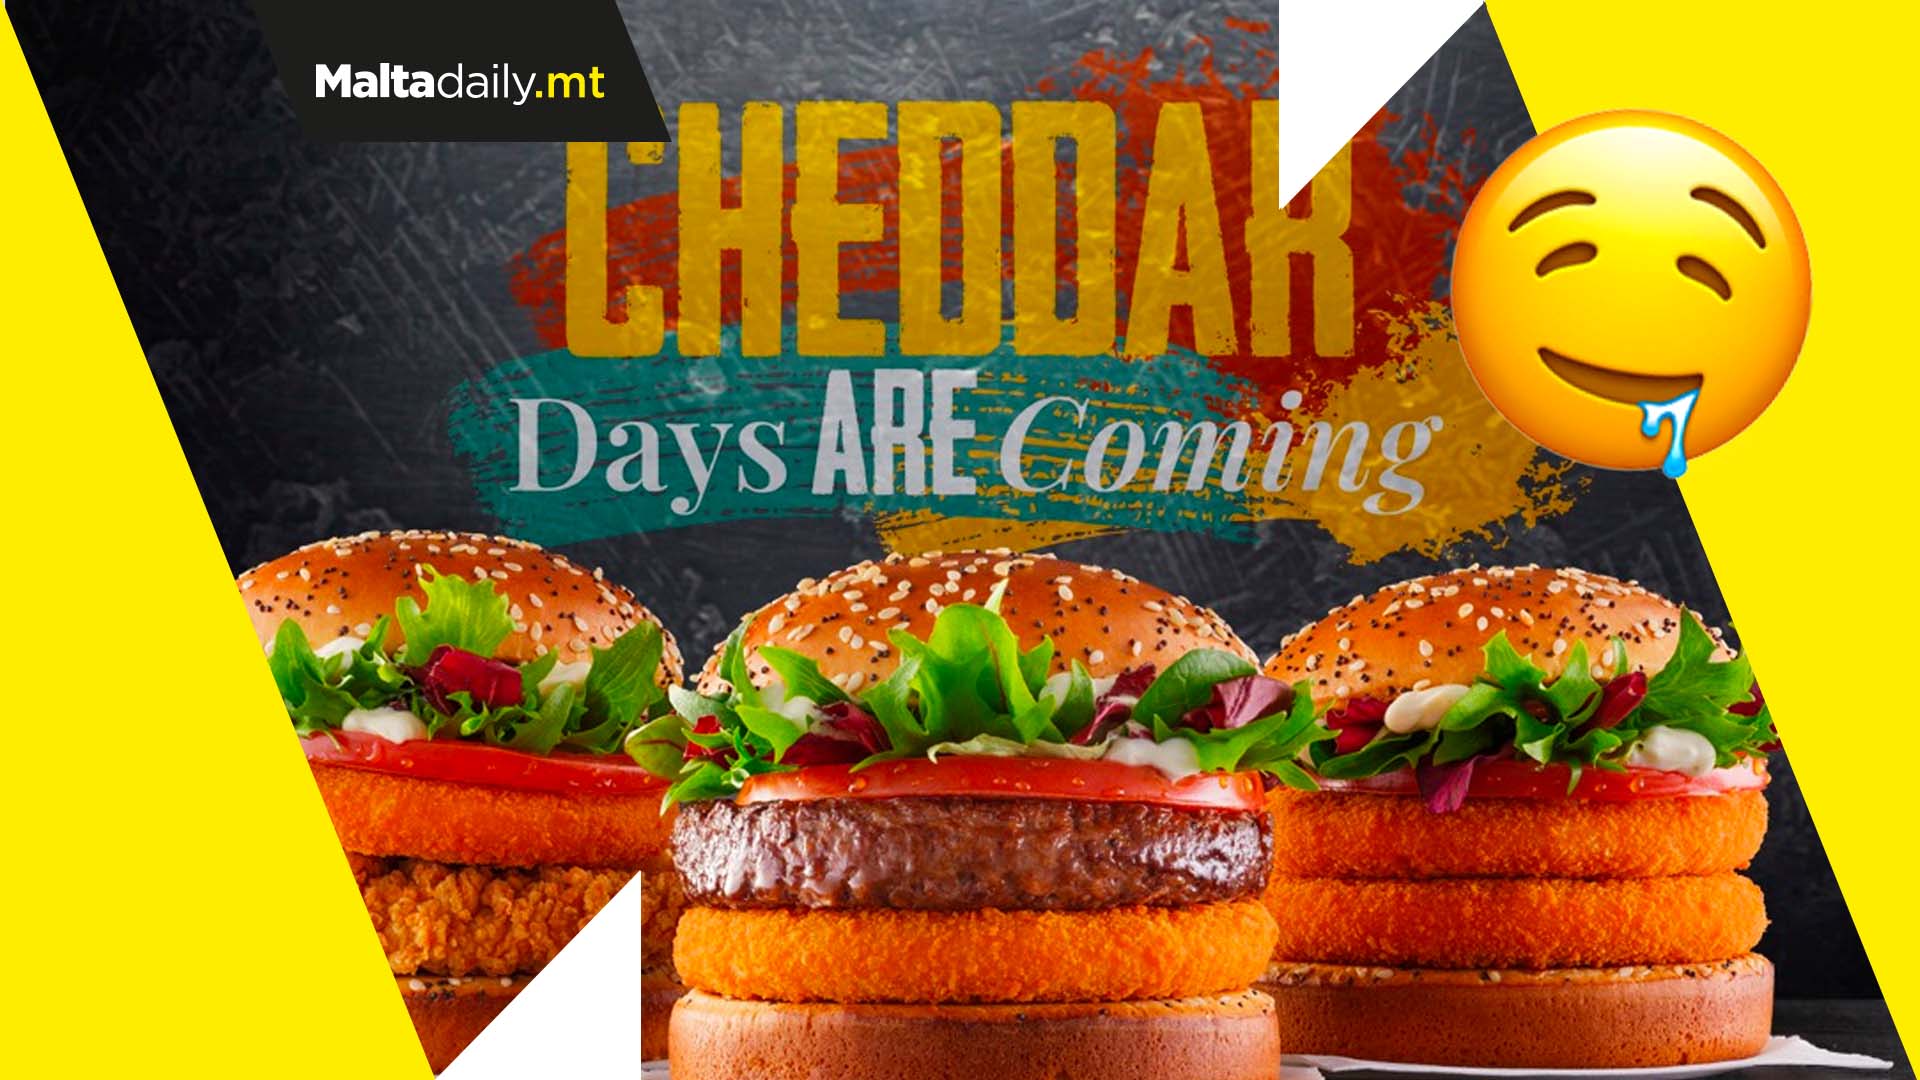 Cheese lovers alert as McDonald’s unveil three cheddar-flavoured burgers